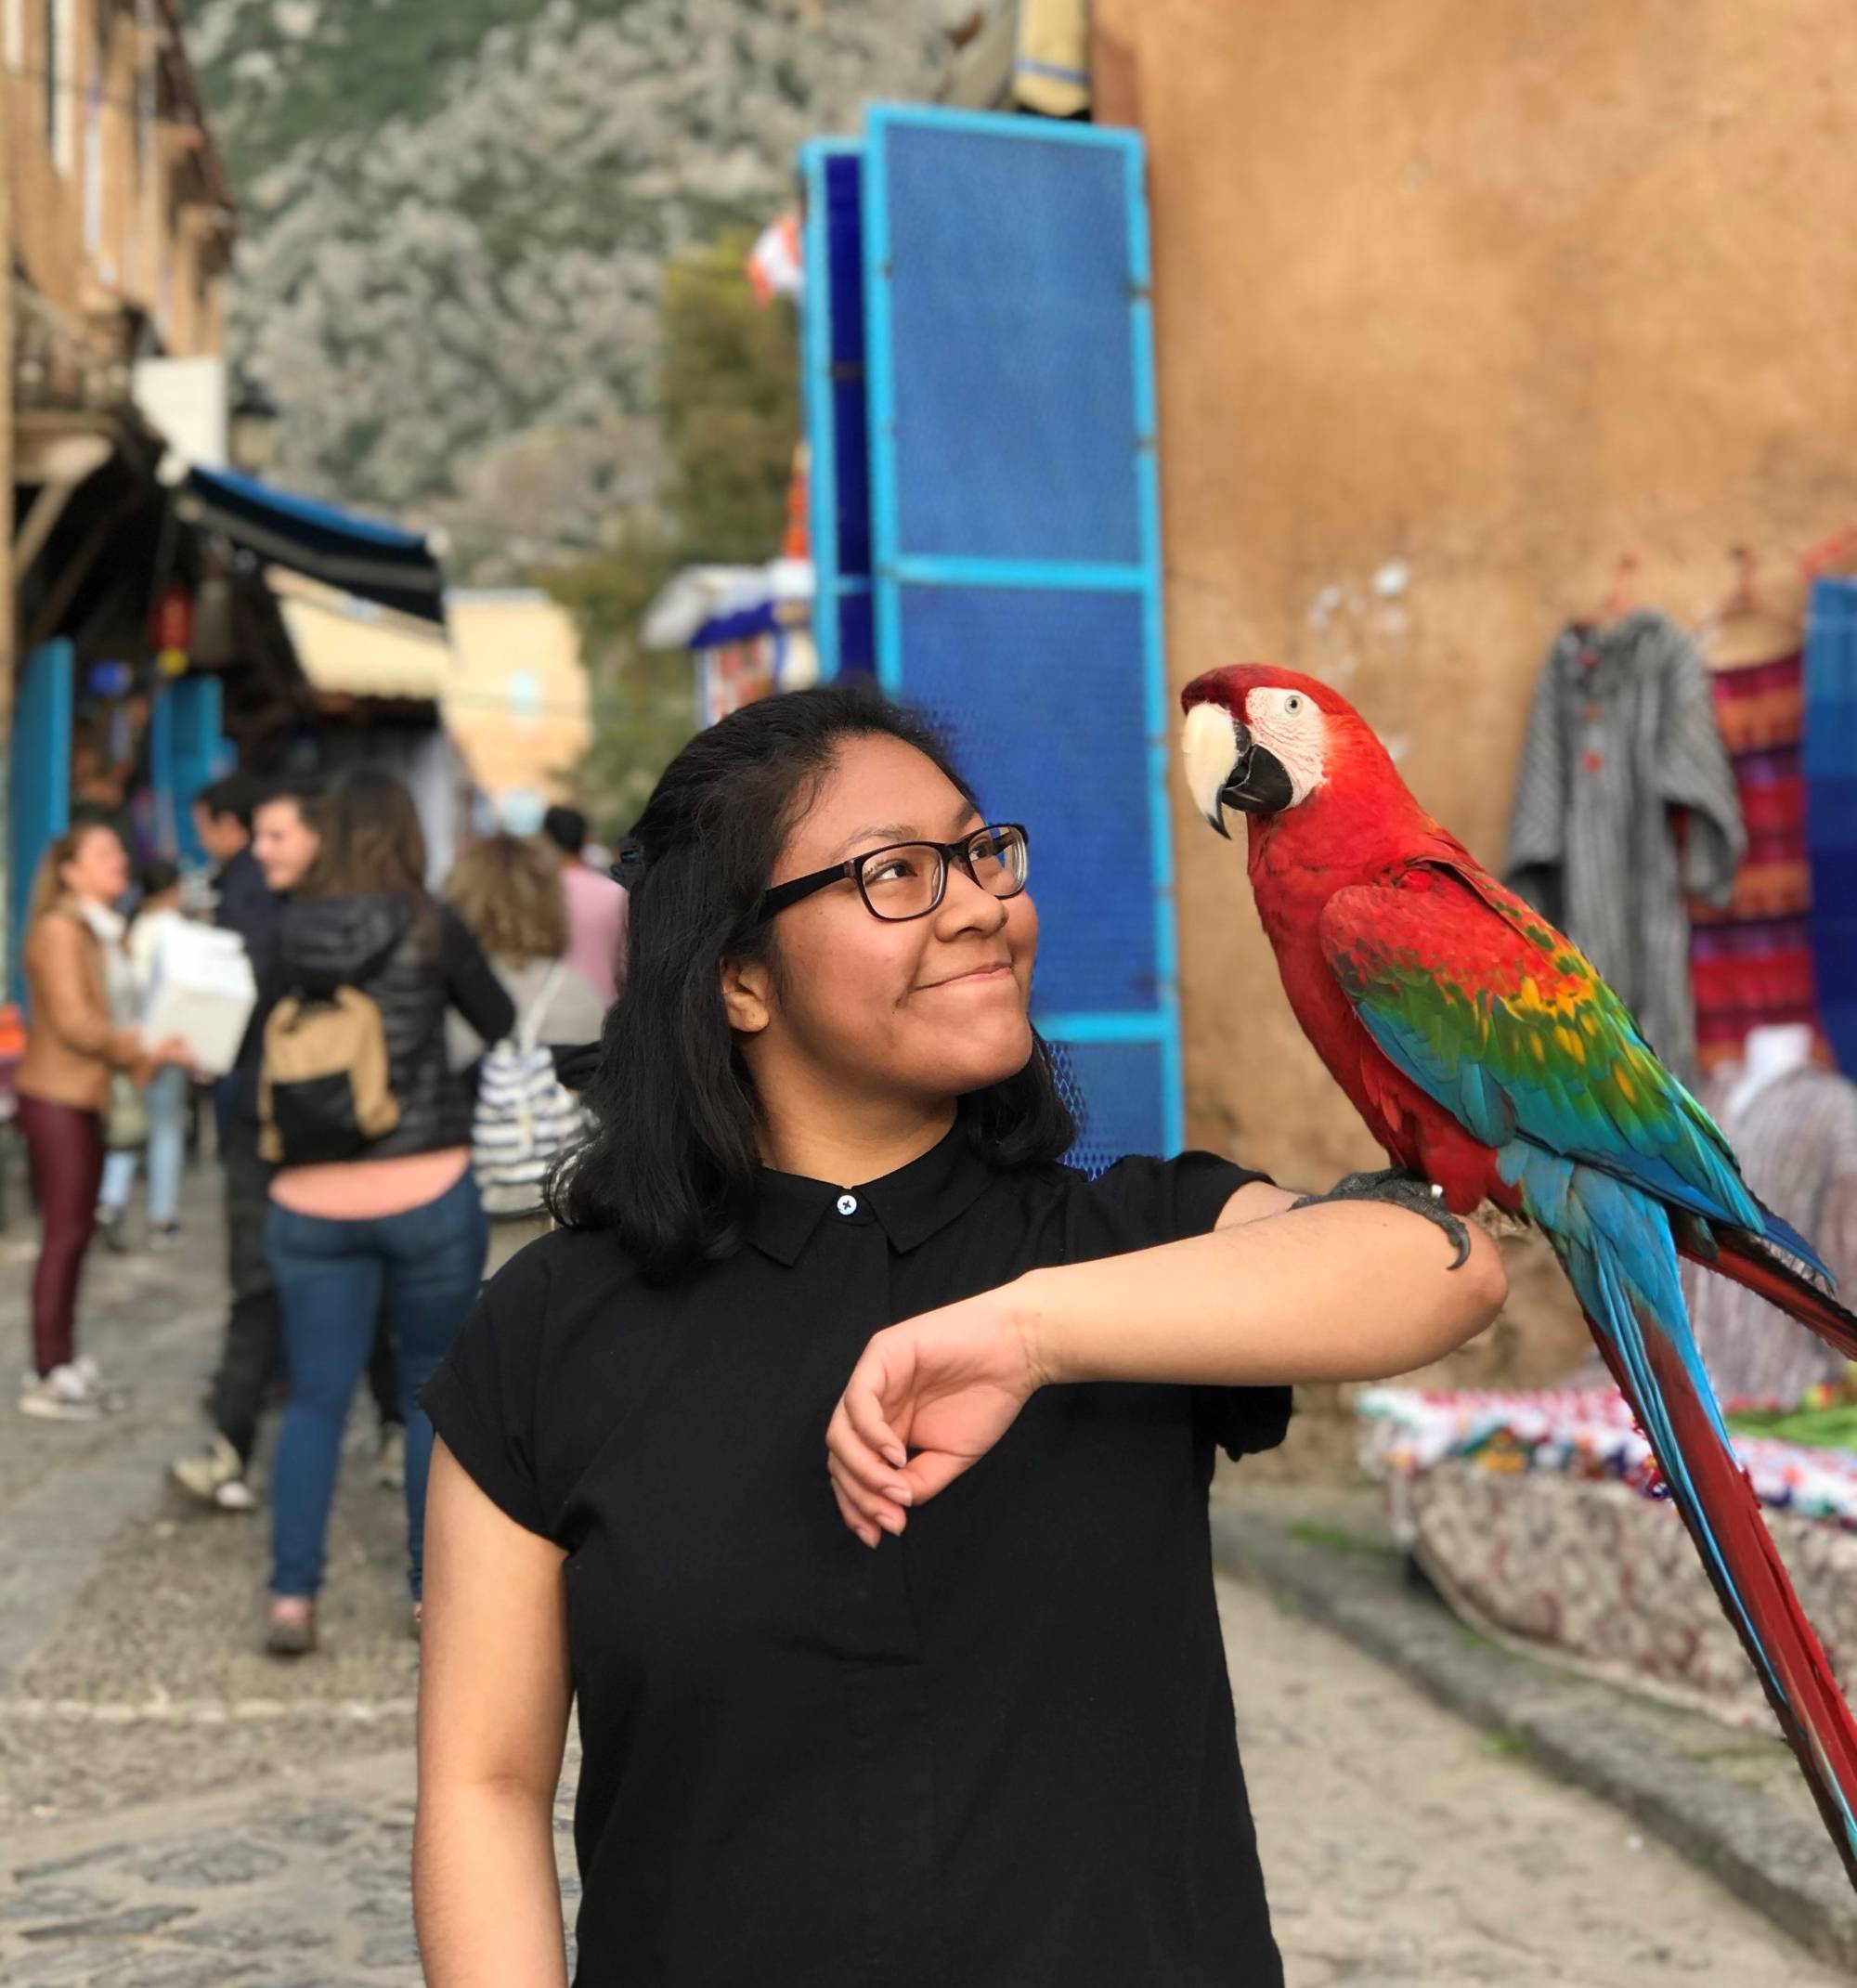 Student with Parrot